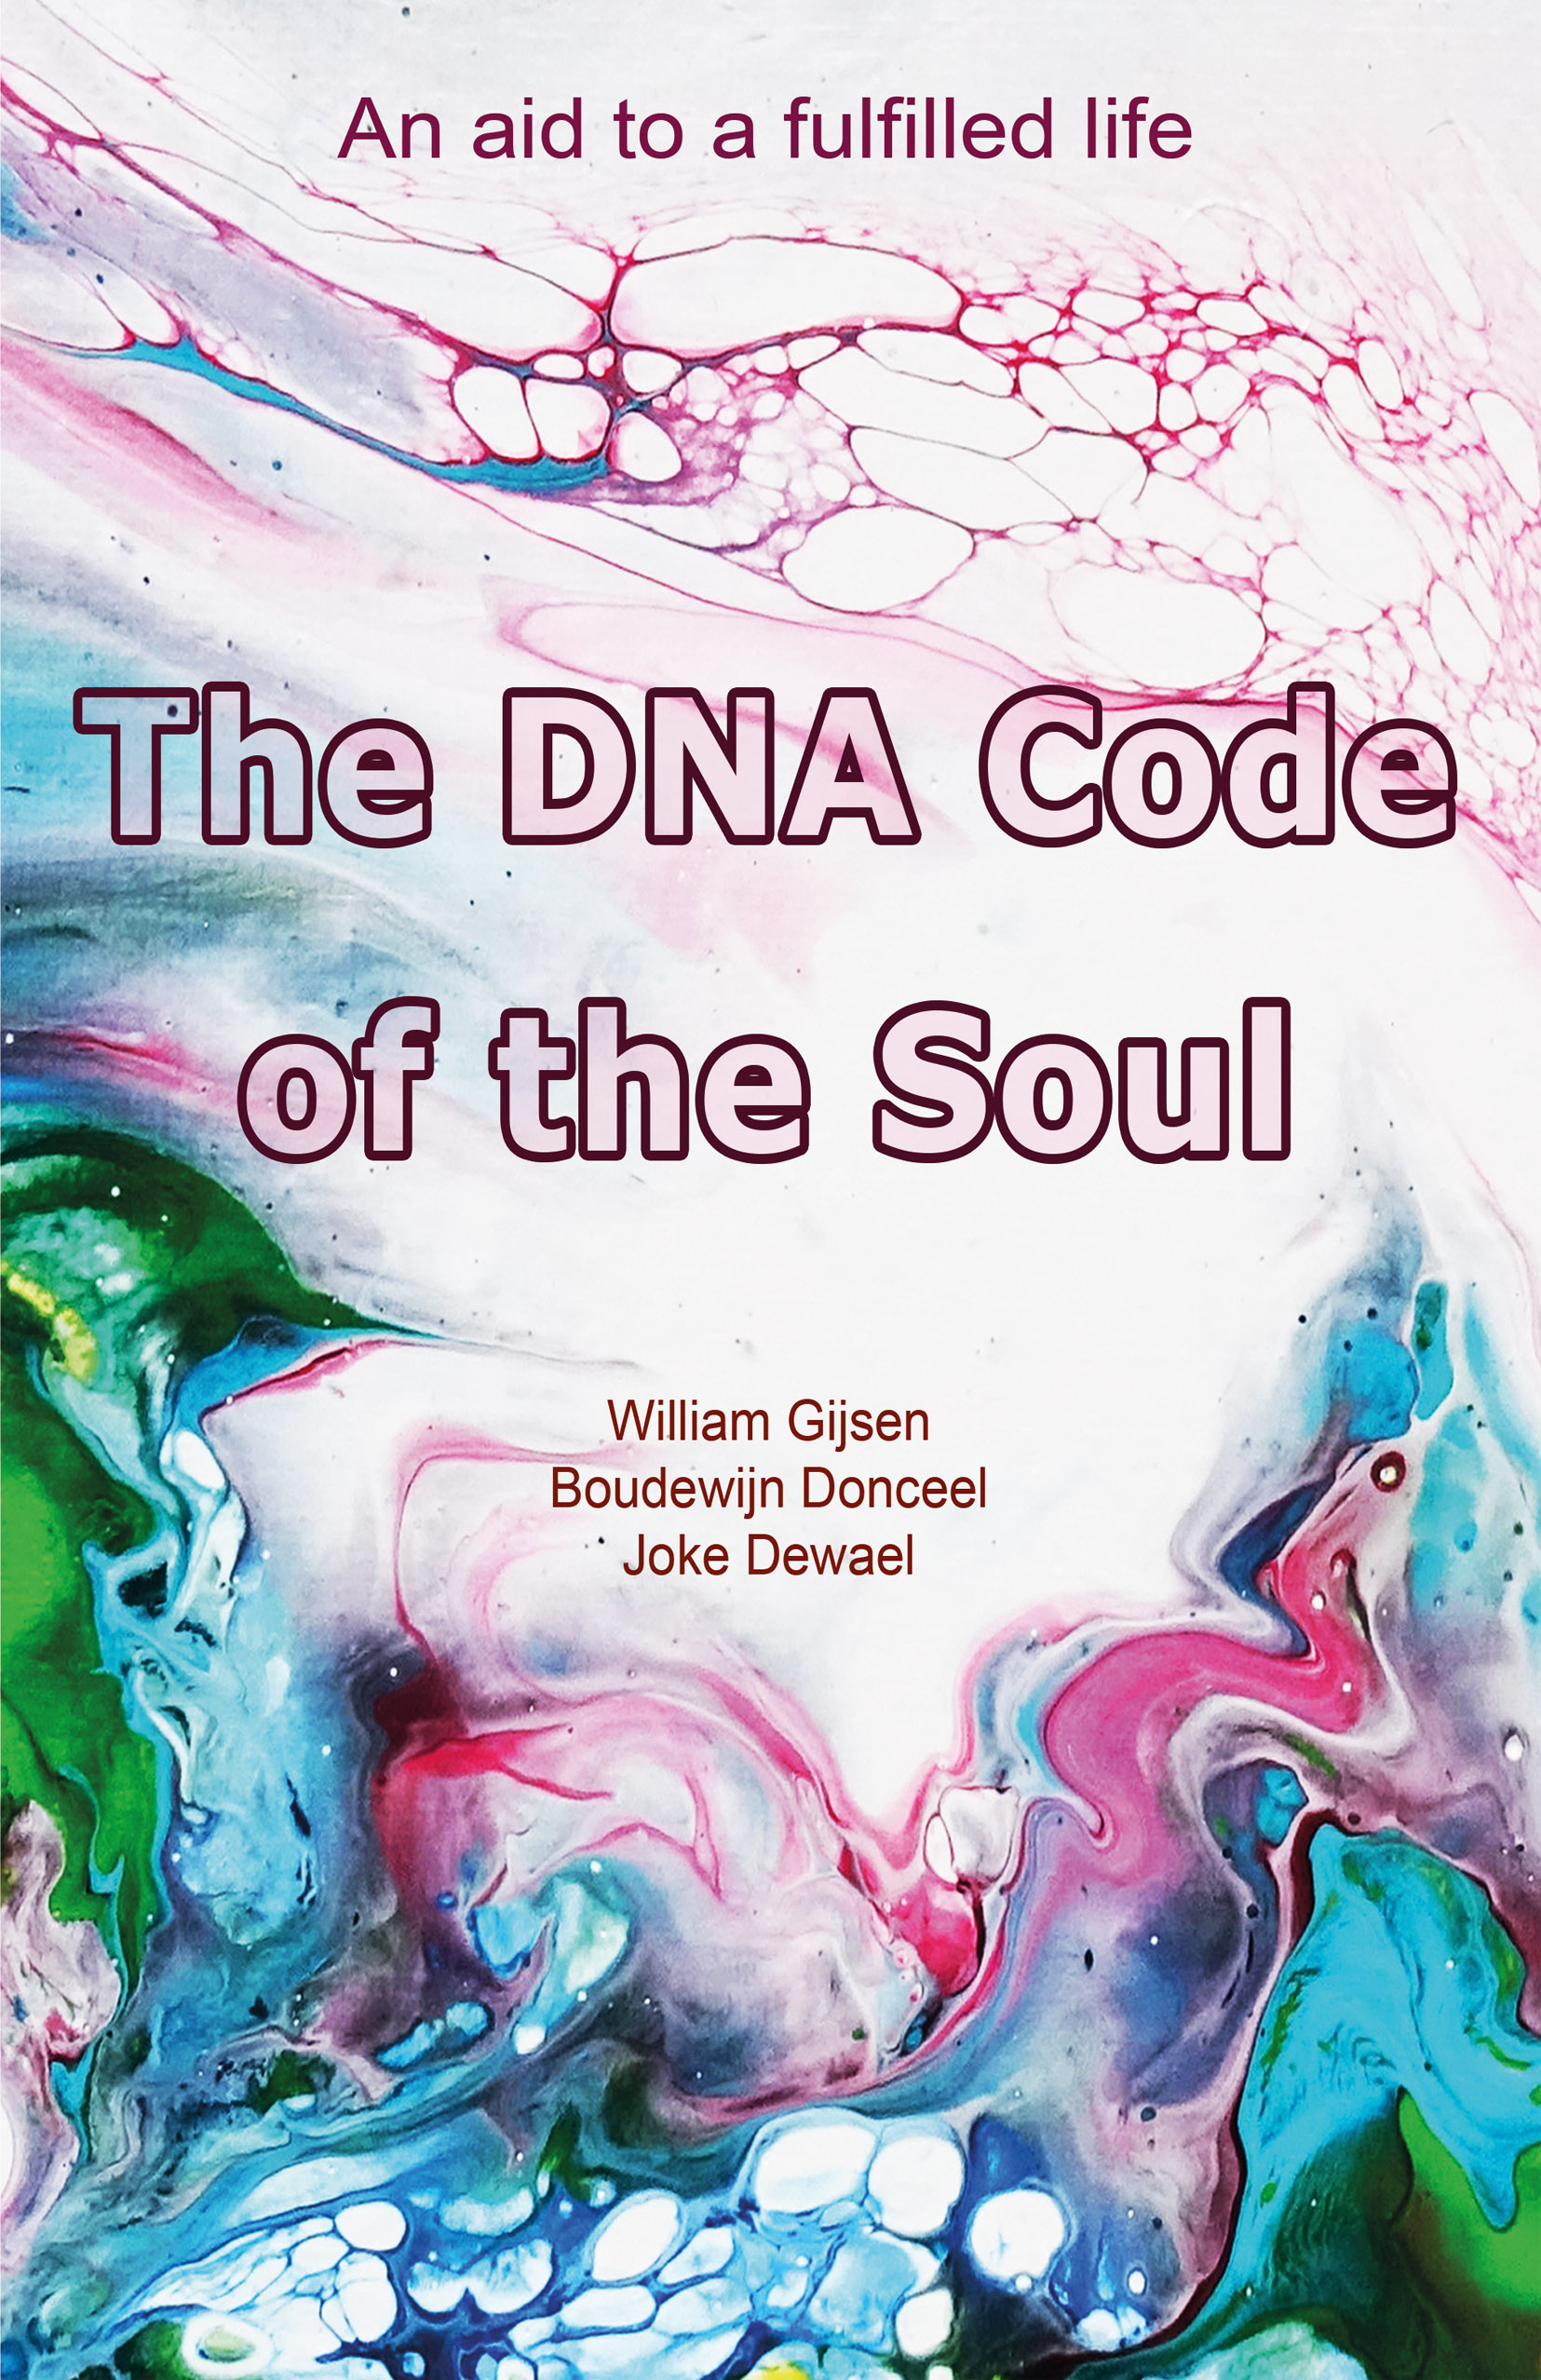 The DNA Code of the Soul - An aid to a fulfilled life-image